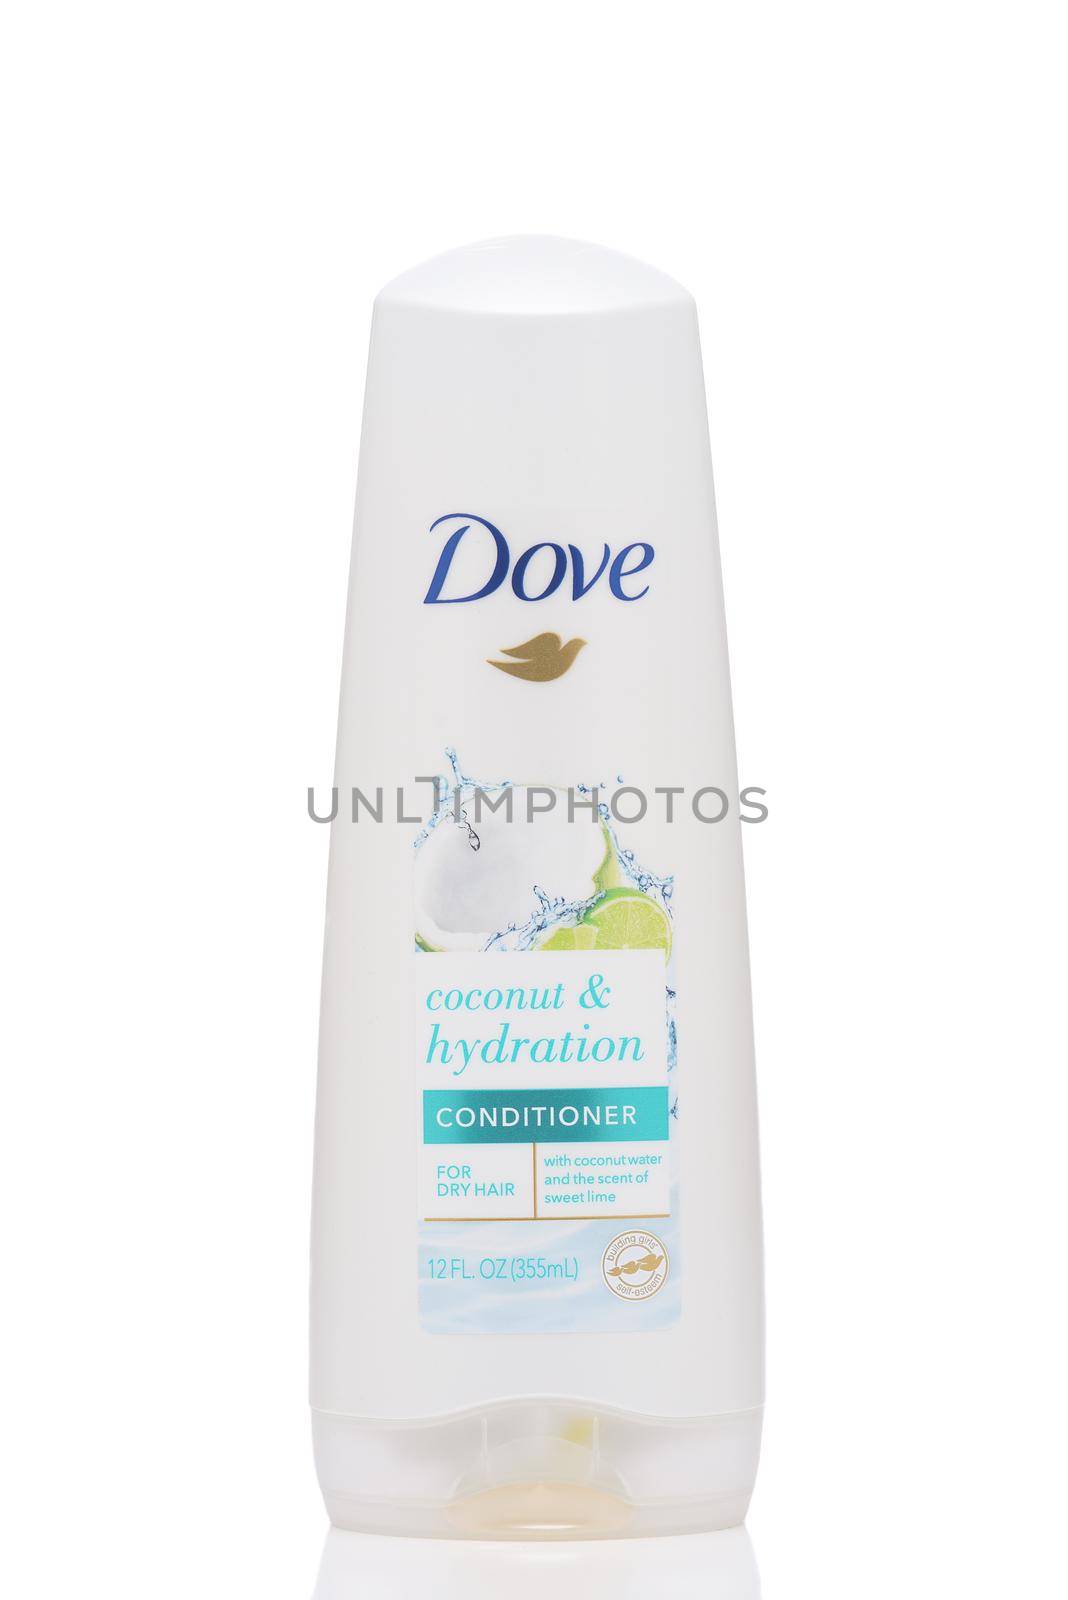 IRVINE, CALIFORNIA - 28 MAY 2021: A bottle of Dove Coconut and Hydration hair conditioner. by sCukrov